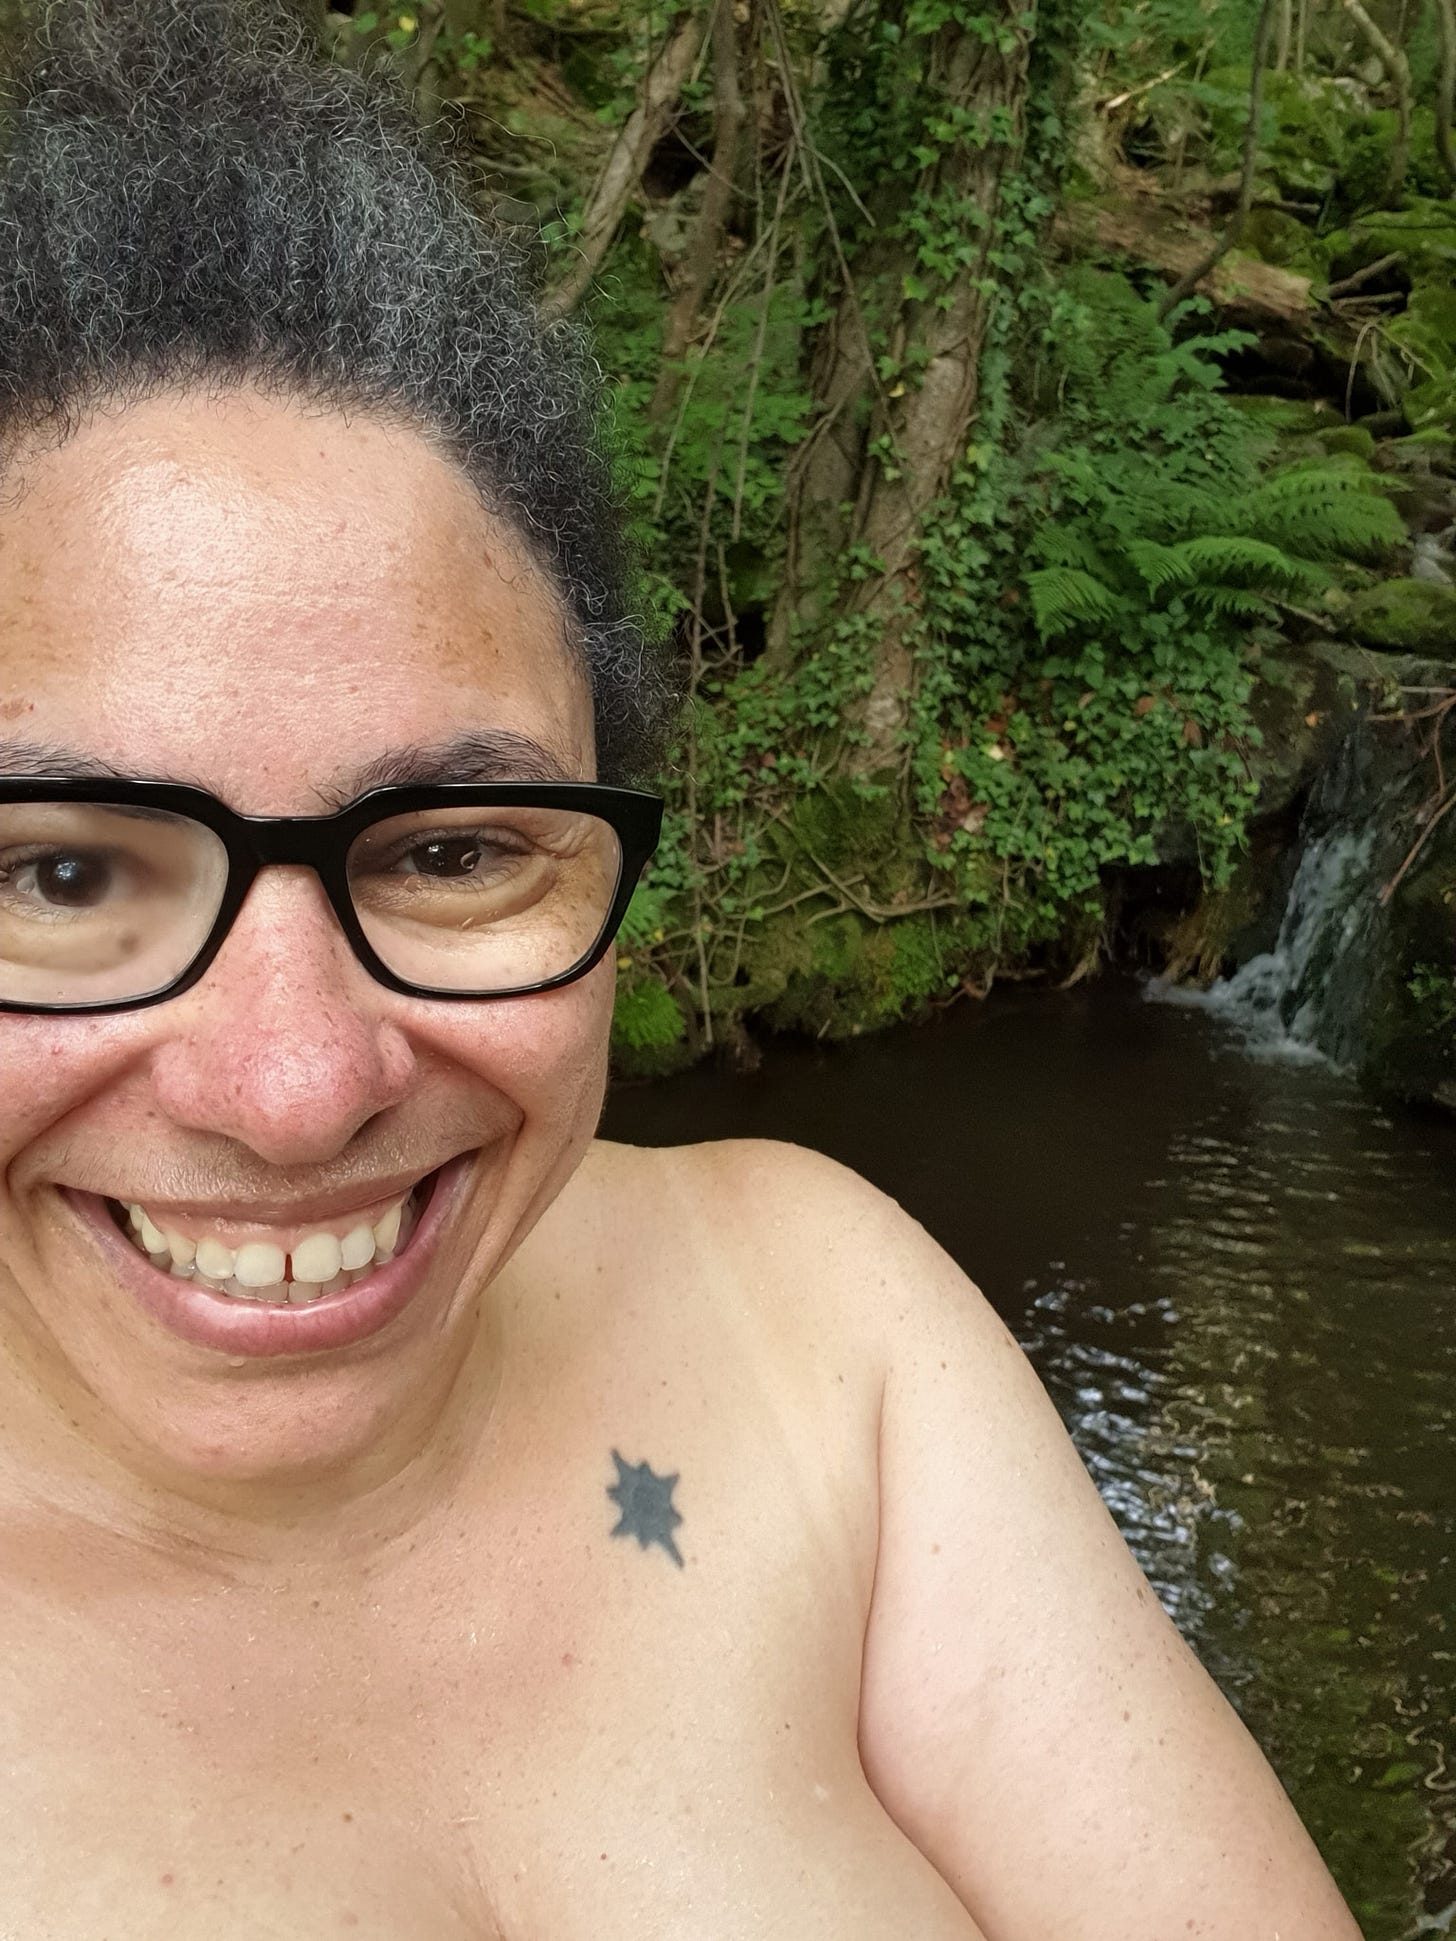 Photo of a woman in black-rimmed glasses in front of a natural pool. She is naked but you can only see from her cleavage upwards.